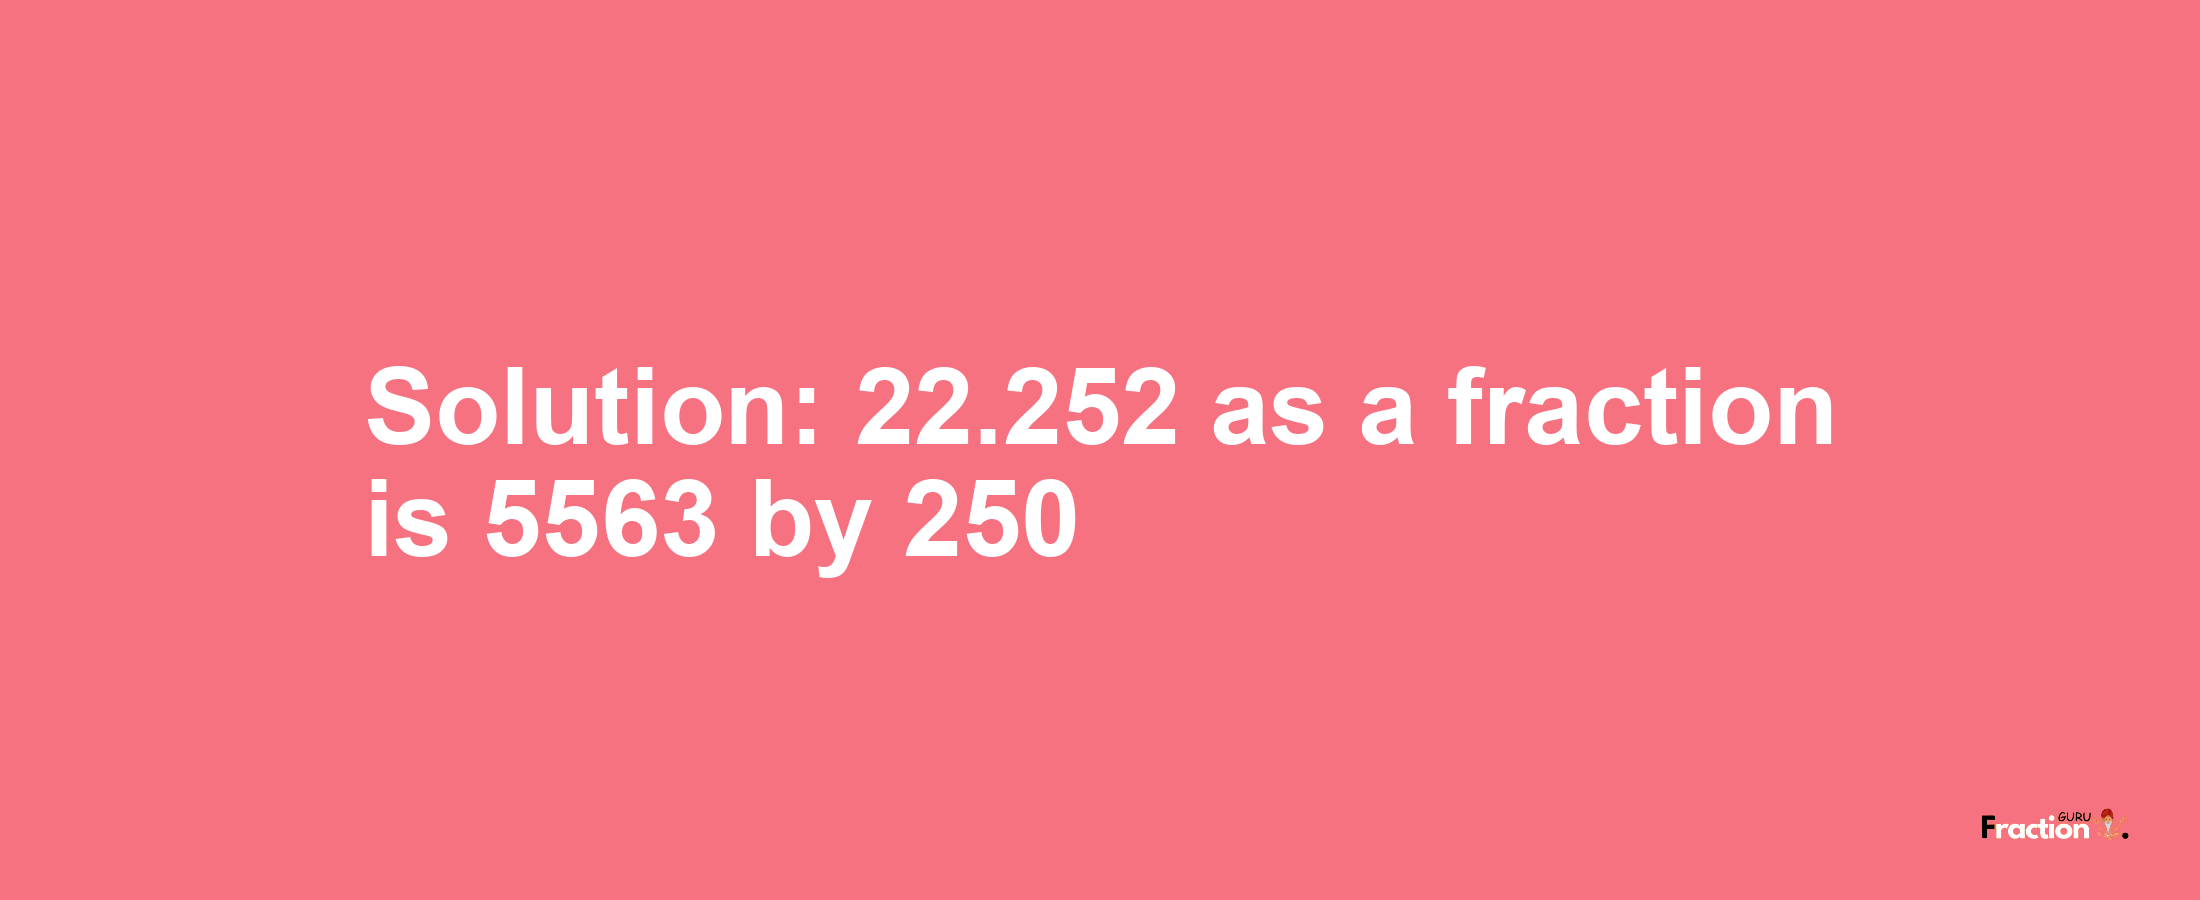 Solution:22.252 as a fraction is 5563/250